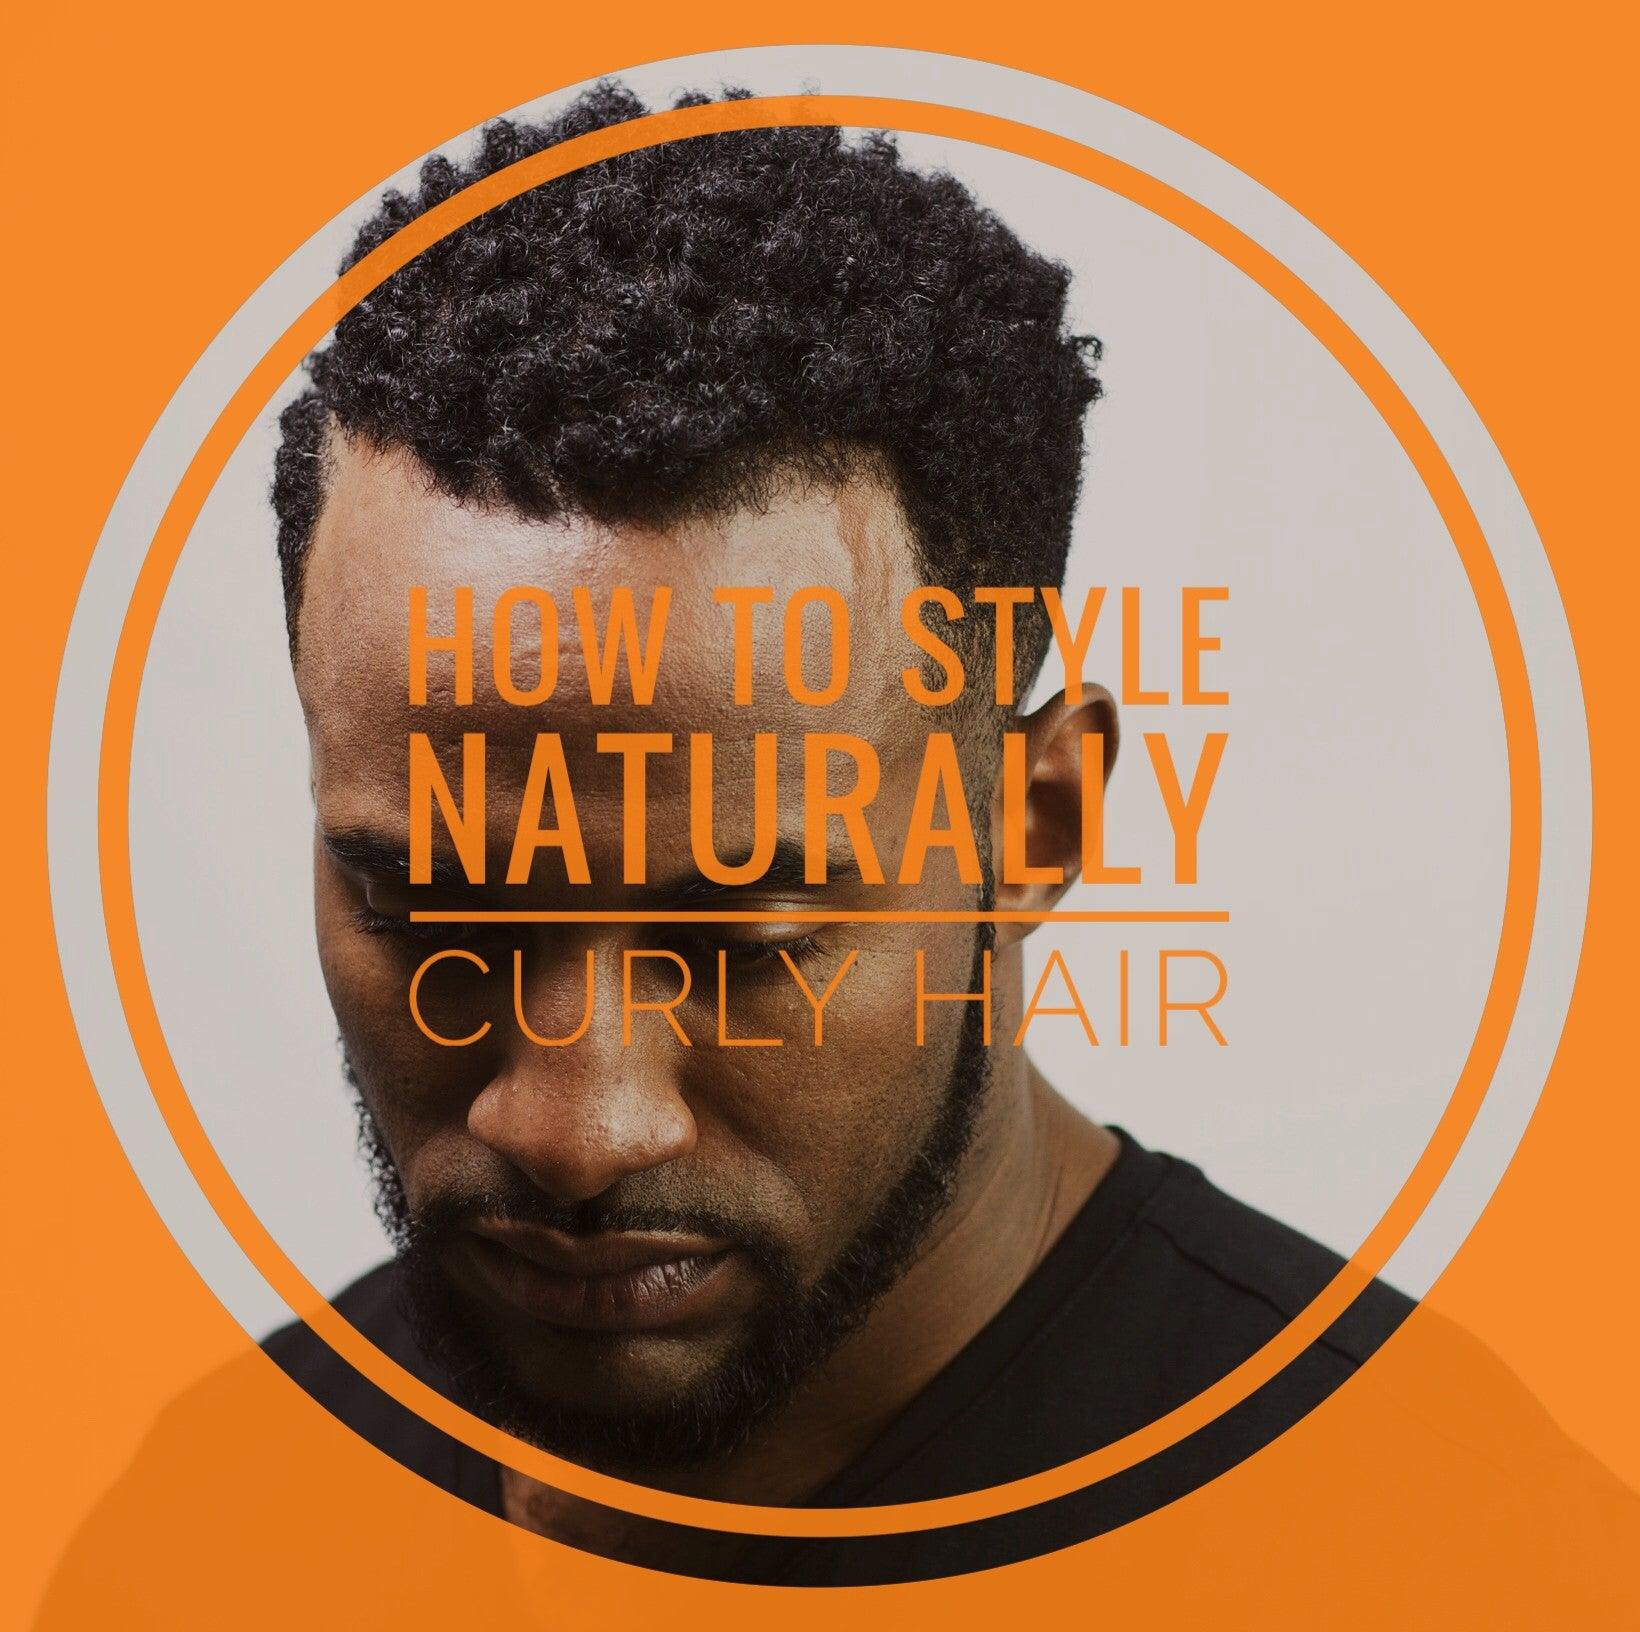 How To Naturally Style Curly Hair for Black Men